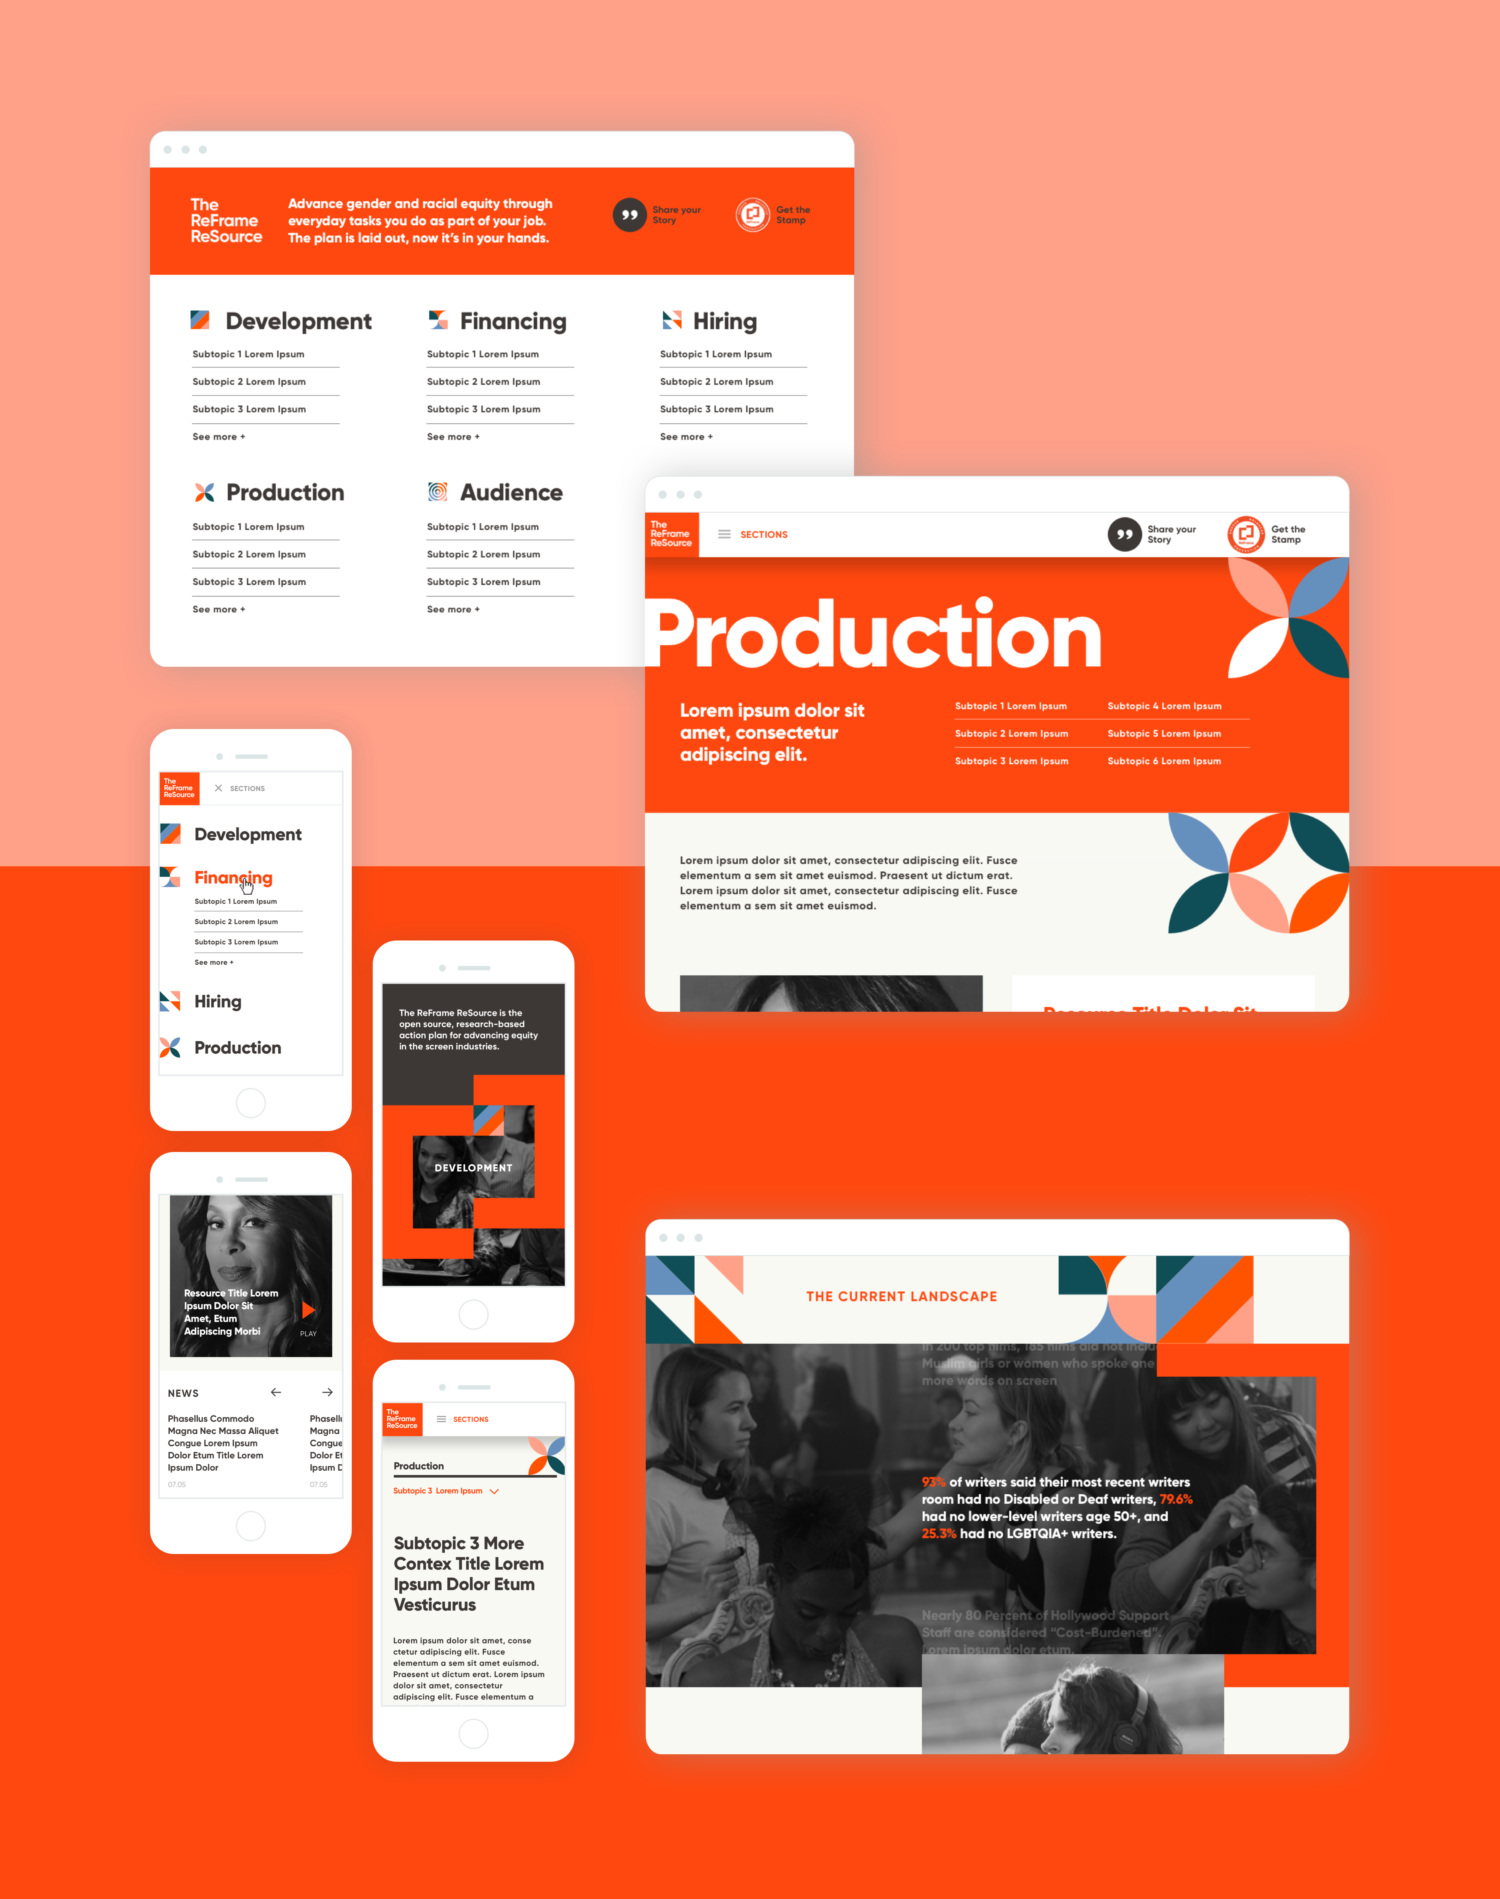 Desktop and mobile designs showing the menu, production page, and resource cards